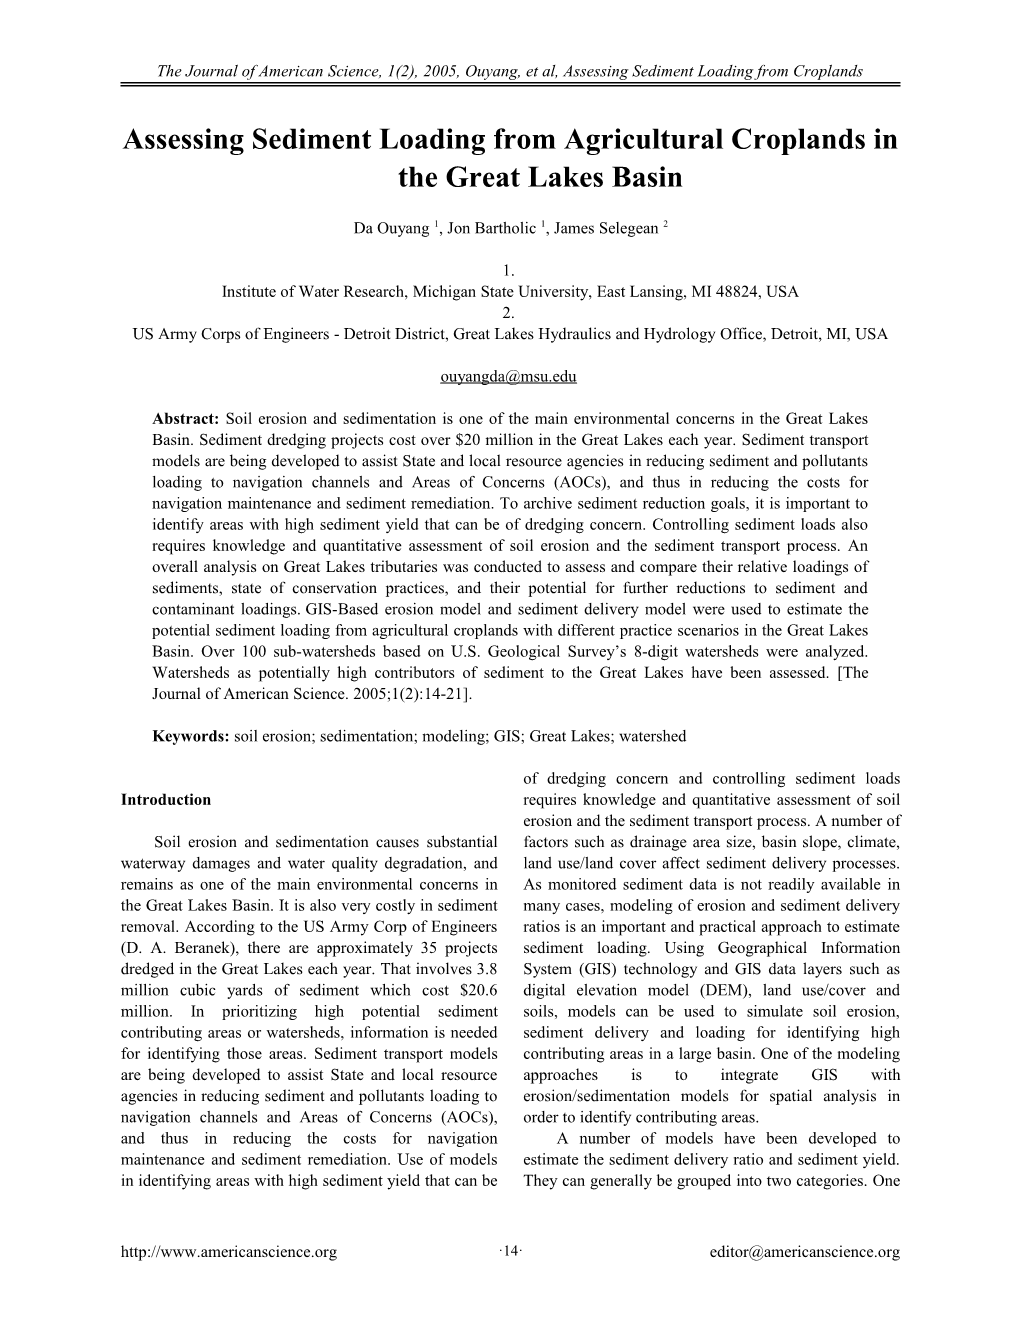 Assessing Sediment Loading from Agricultural Croplands in the Great Lakes Basin